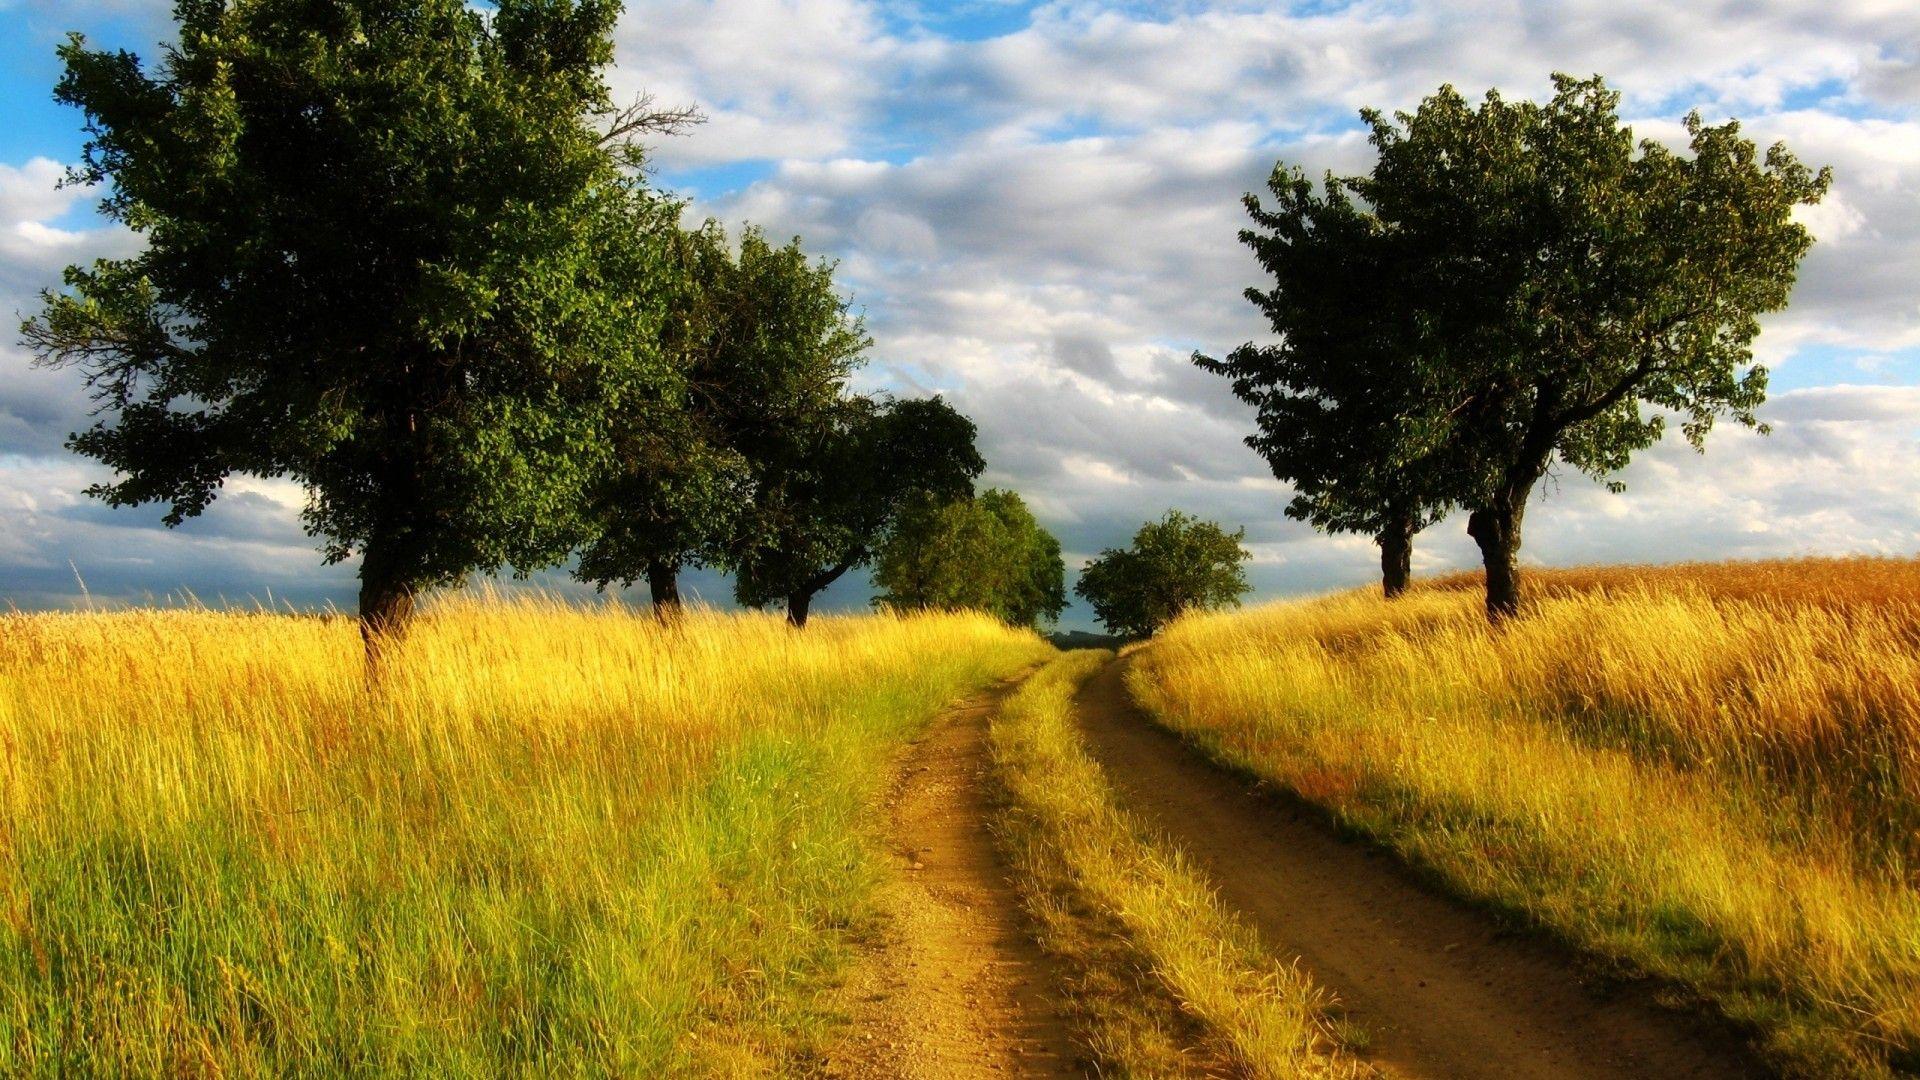 Country Road Wallpaper 7129 1920 x 1080